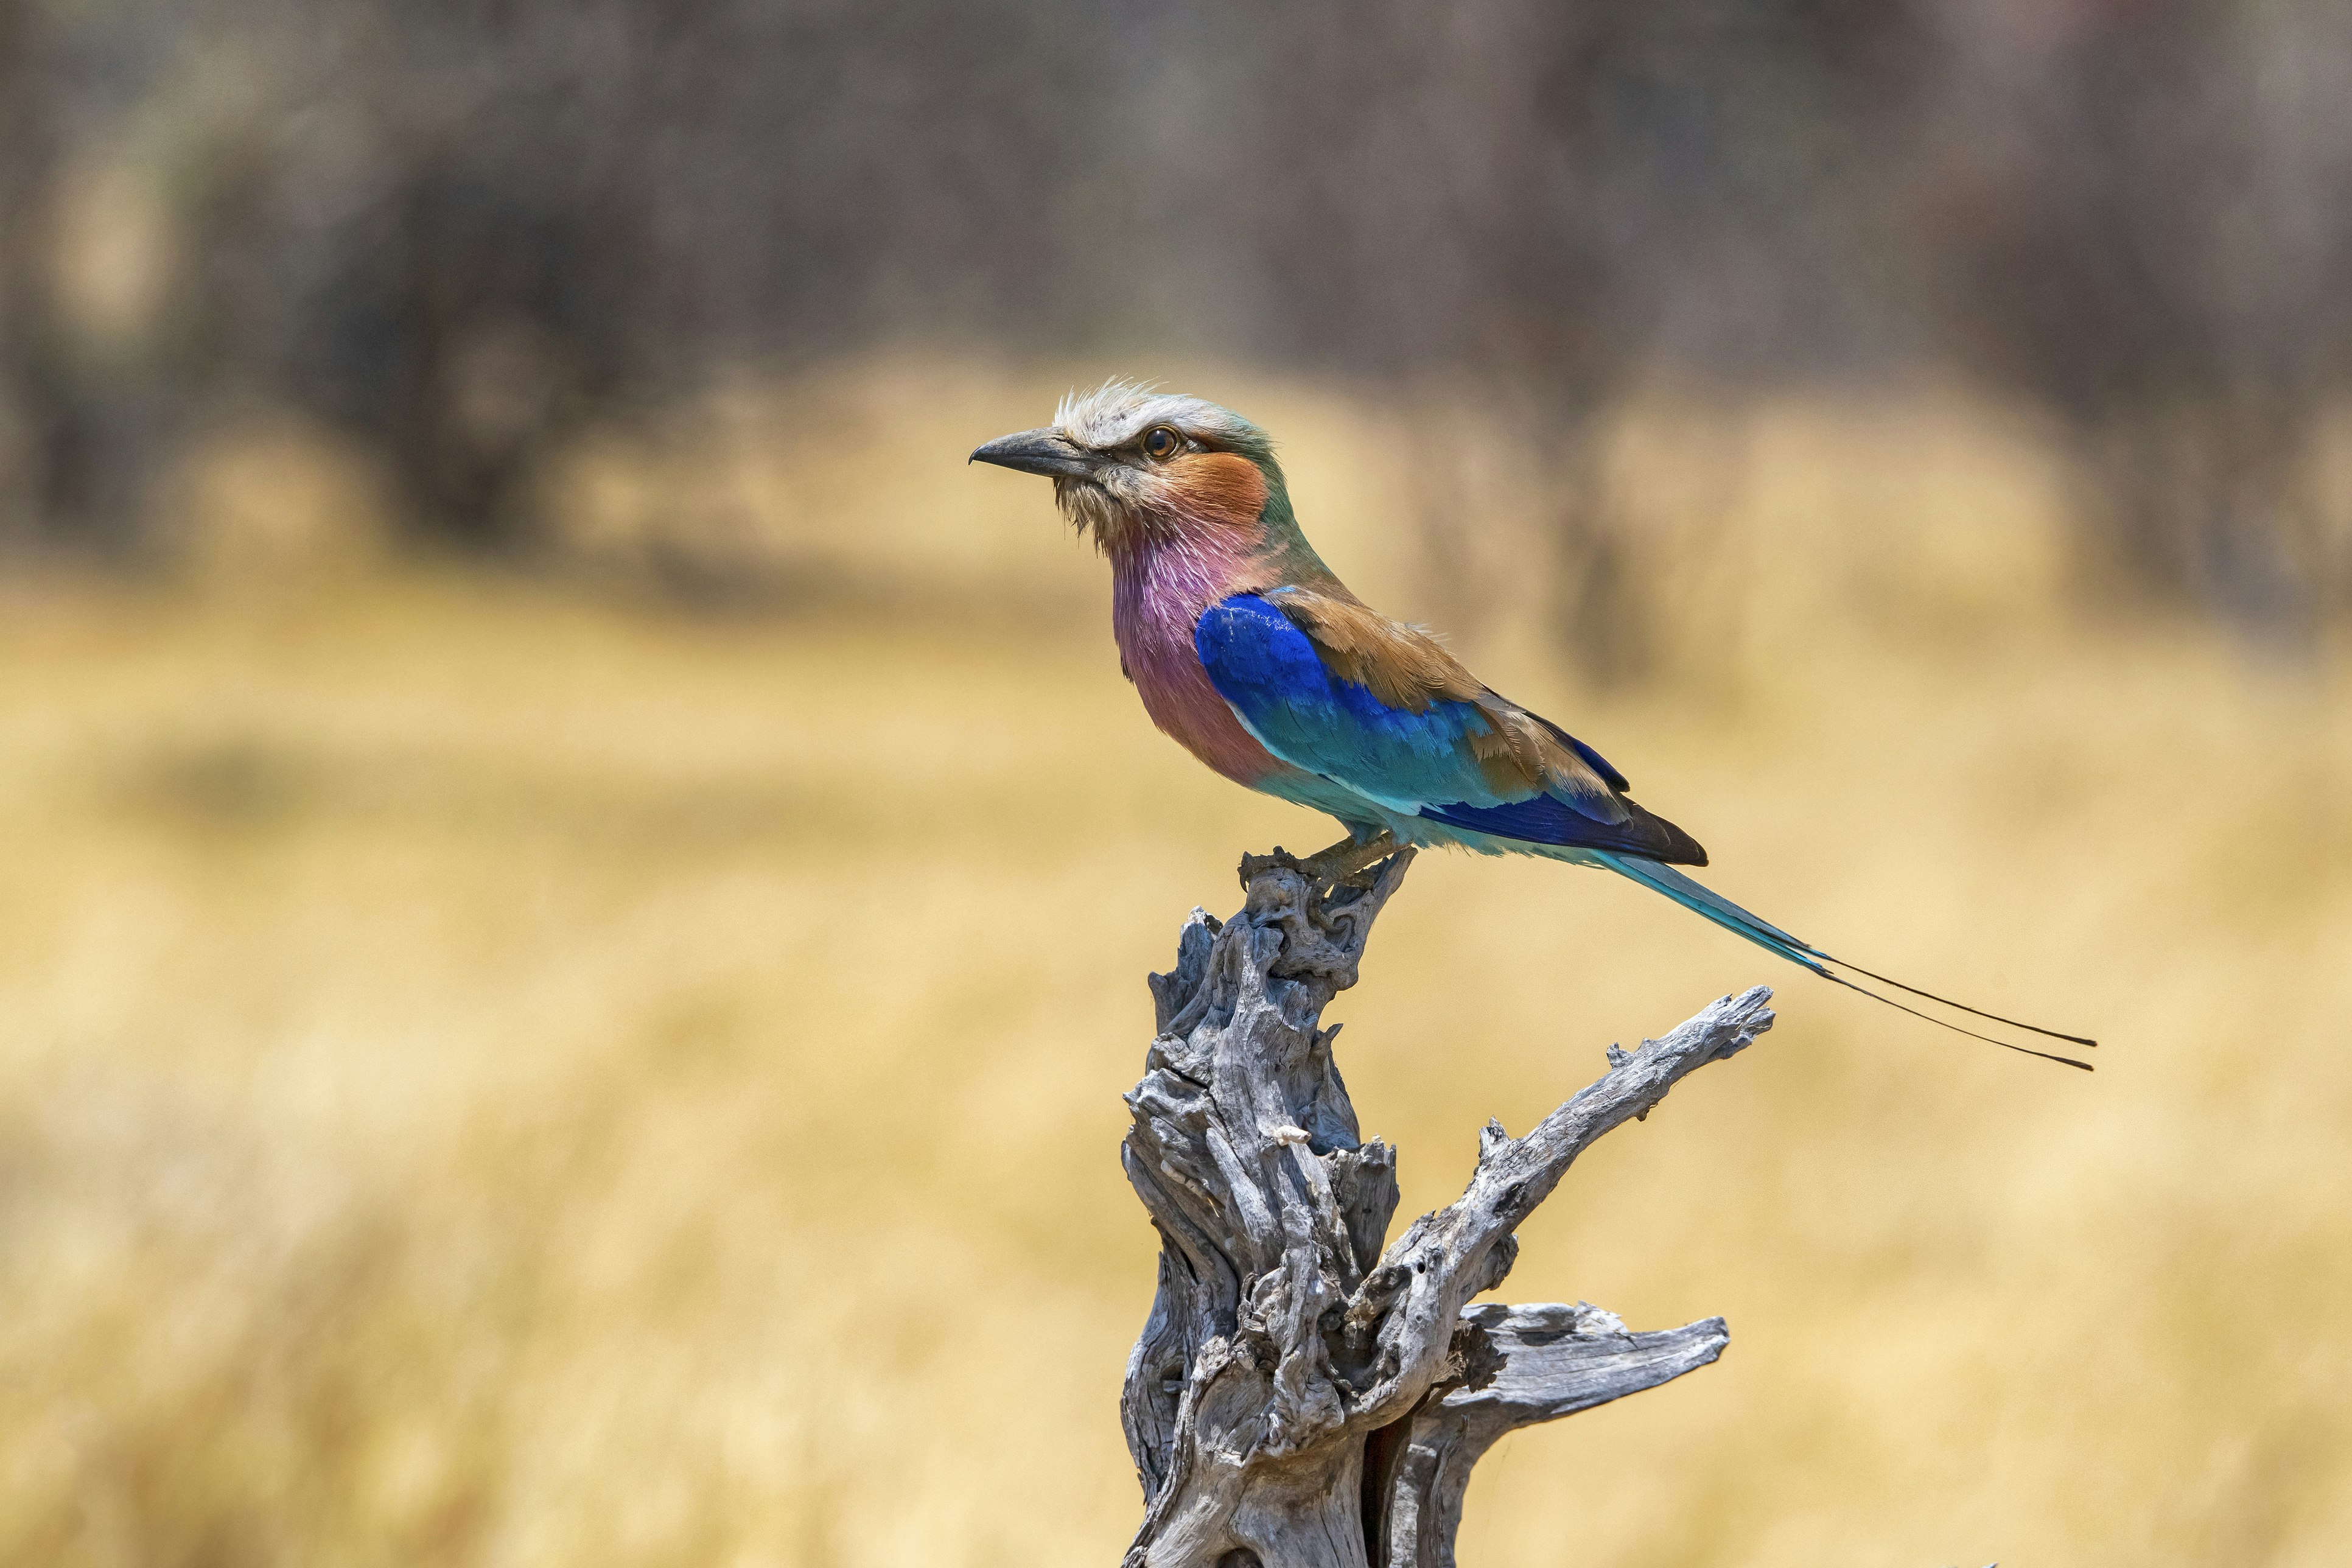 A colorful lilac-breasted roller perched on a branch in the Okavango Delta, Botswana